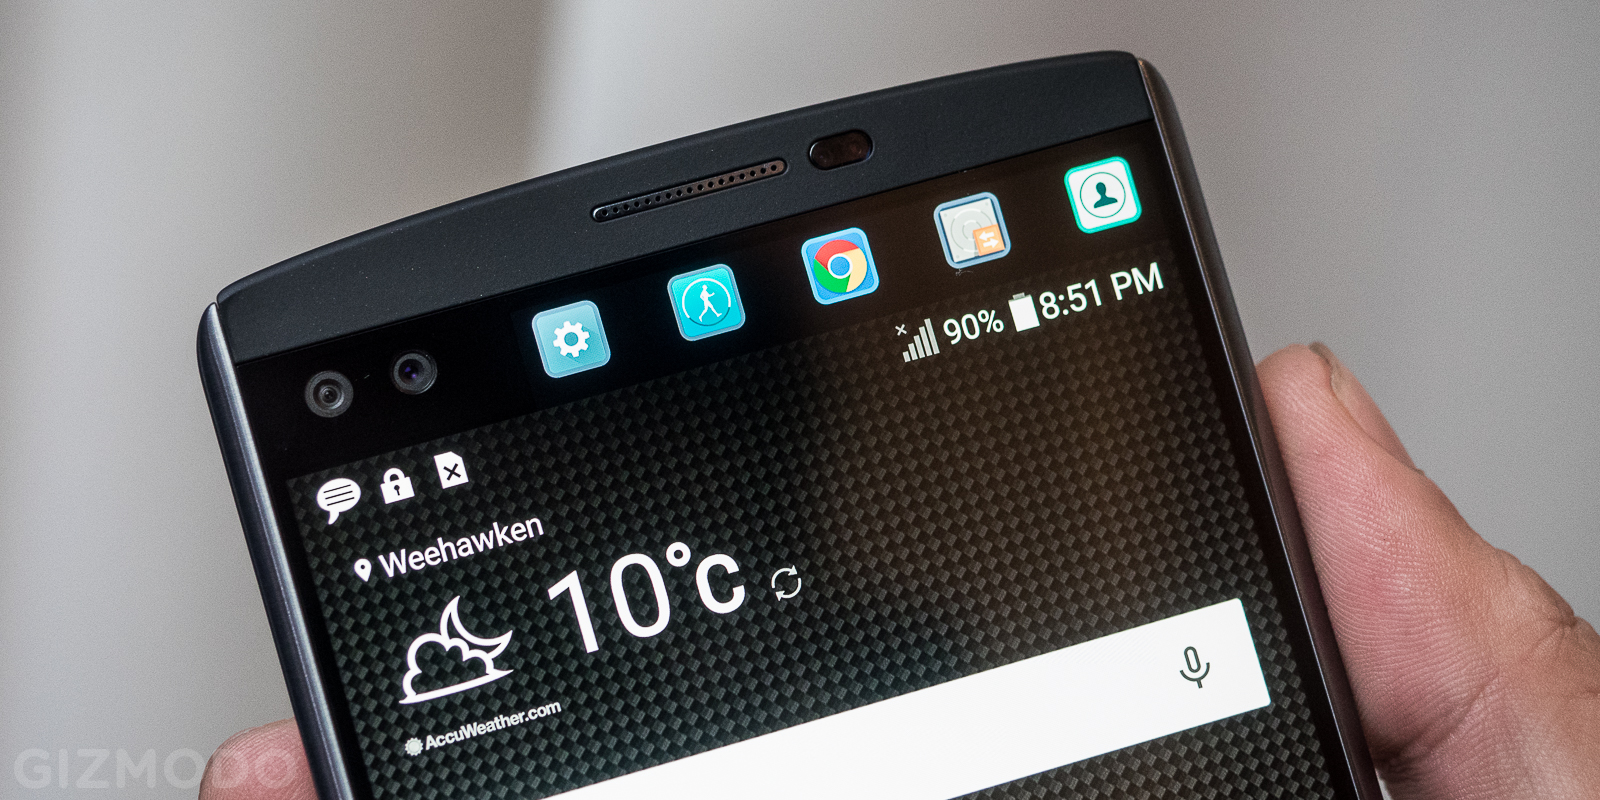 LG’s V10 Smartphone Is One Big Handful Of Weird, But I Kind Of Love It